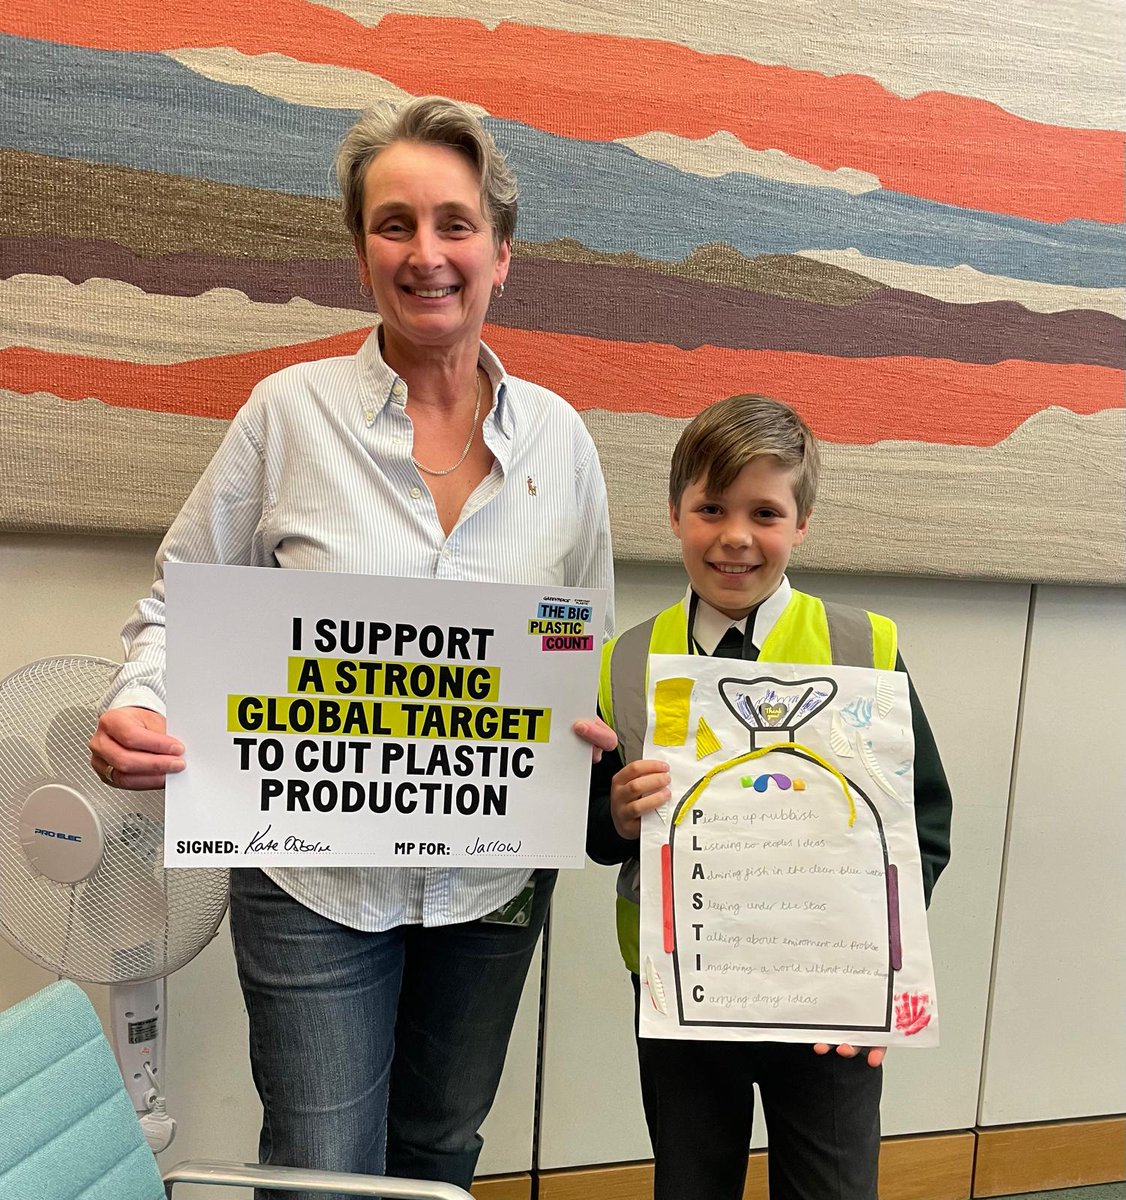 Data collected in the #BigPlasticCount revealed 1.7billion pieces of plastic waste are thrown away each week 58% of these plastics are incinerated with only 17% being recycled I support Big Plastic Counts calls for legally binding global target to cut plastic production & waste